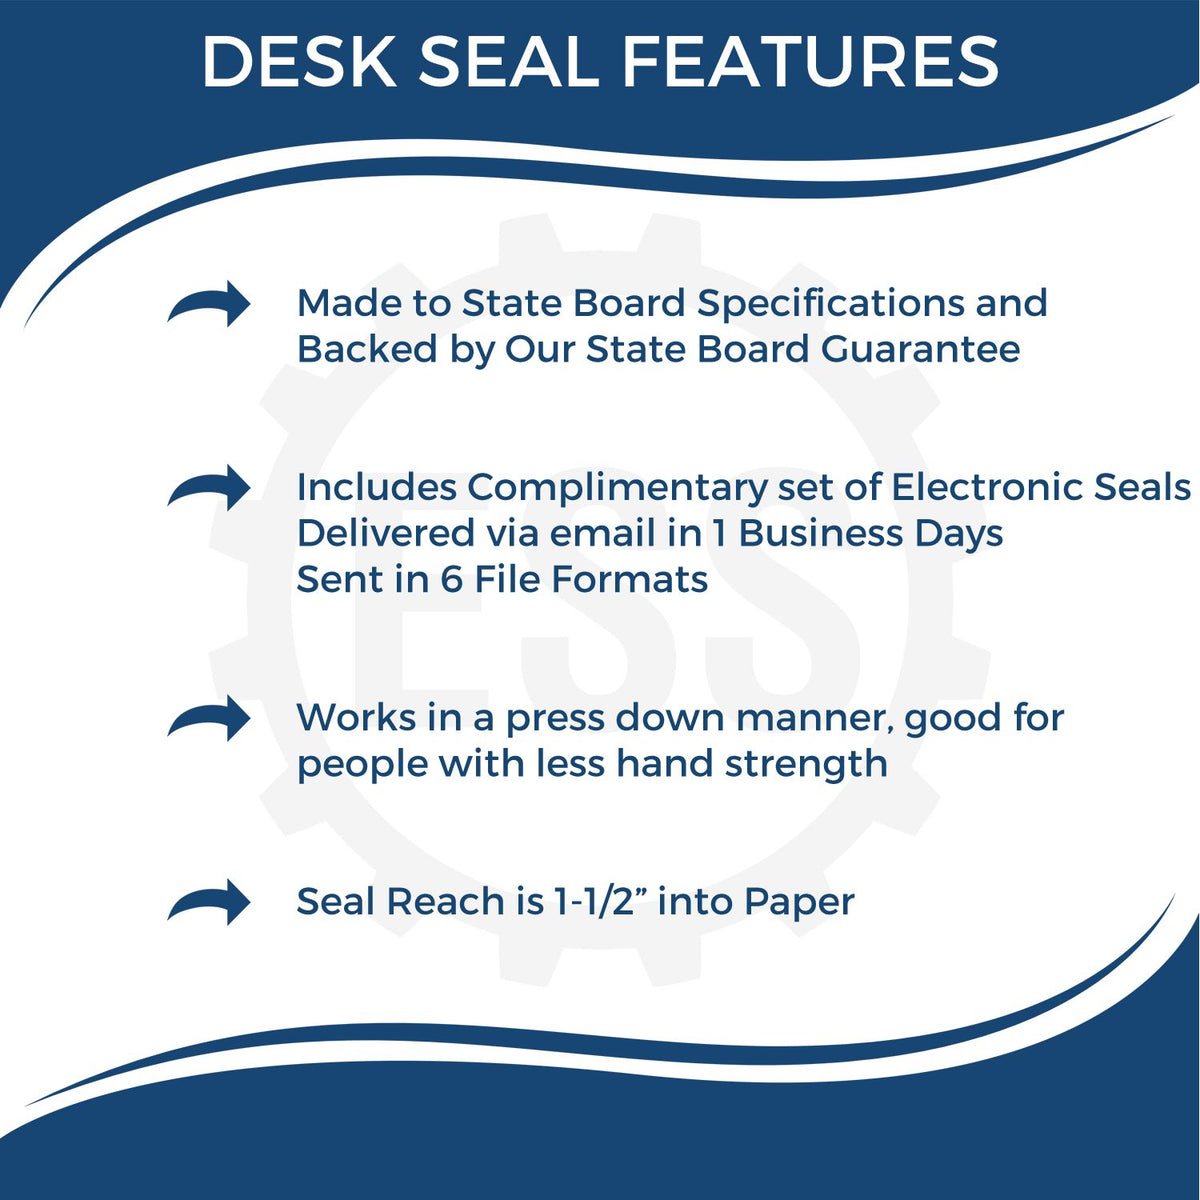 A picture of an infographic highlighting the selling points for the Kansas Engineer Desk Seal